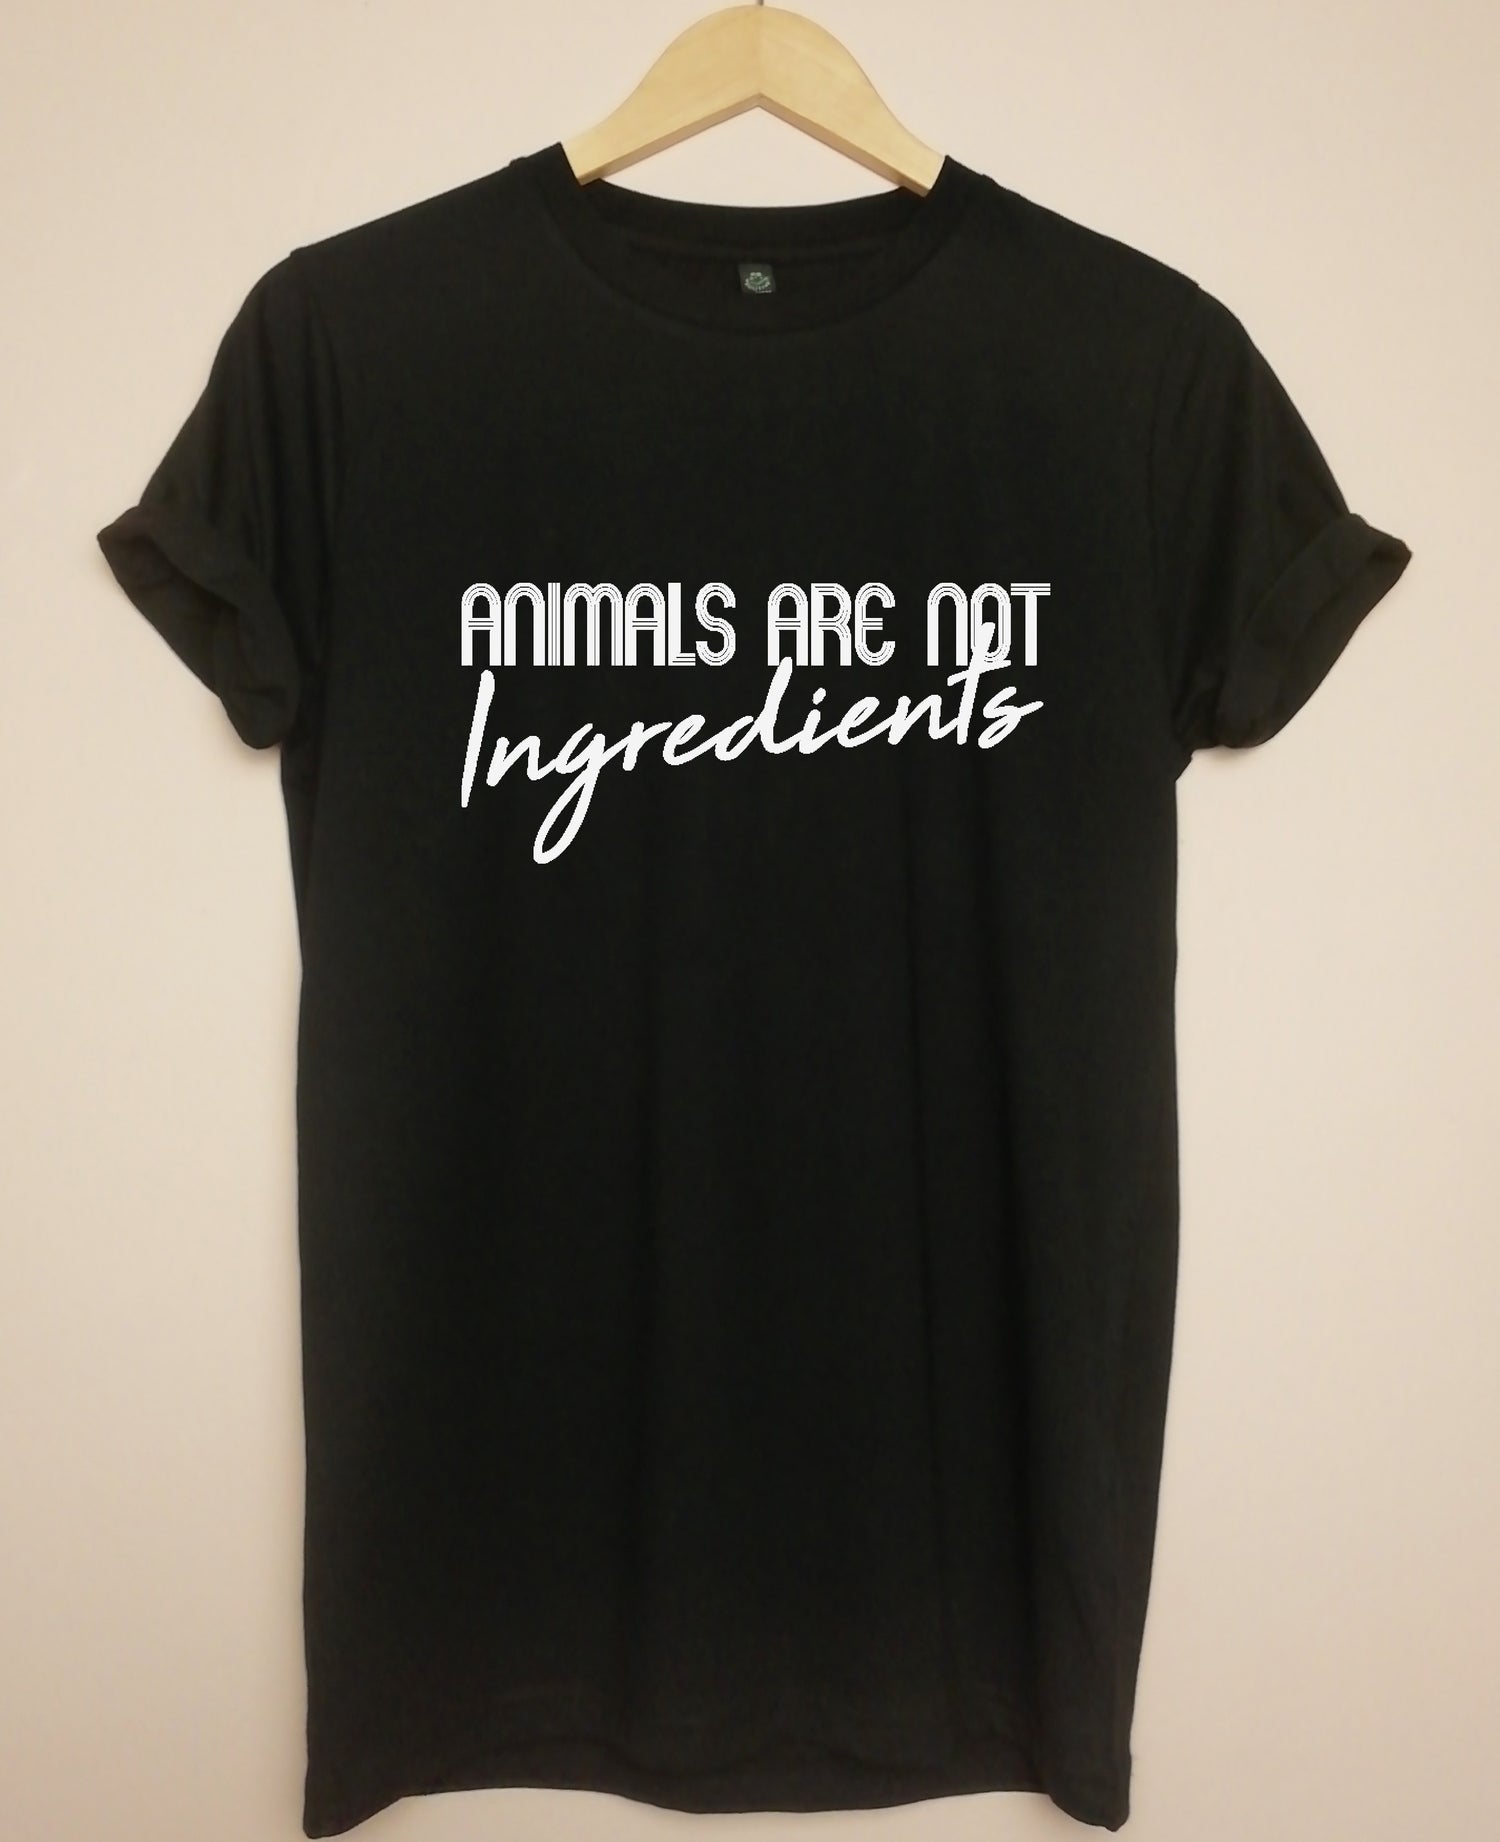 Animals are not ingredients Organic T Shirt